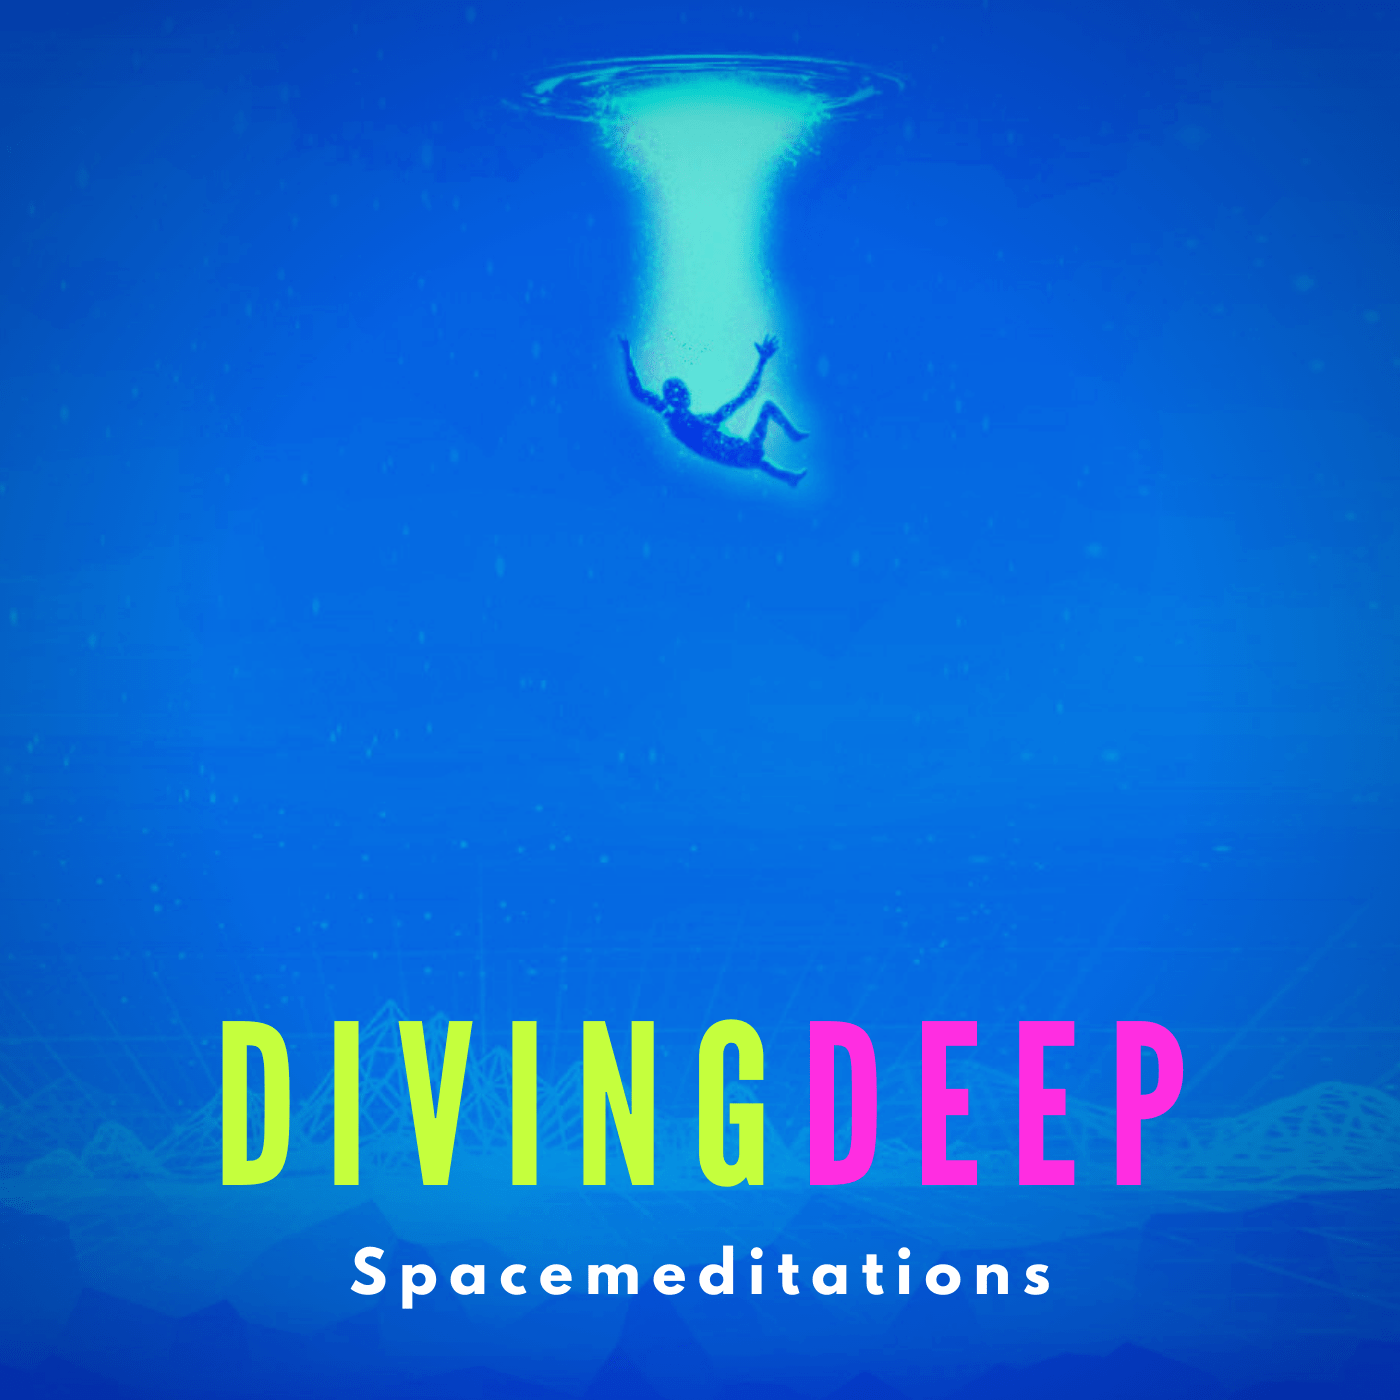 Spacemeditaitoins - Diving Deep